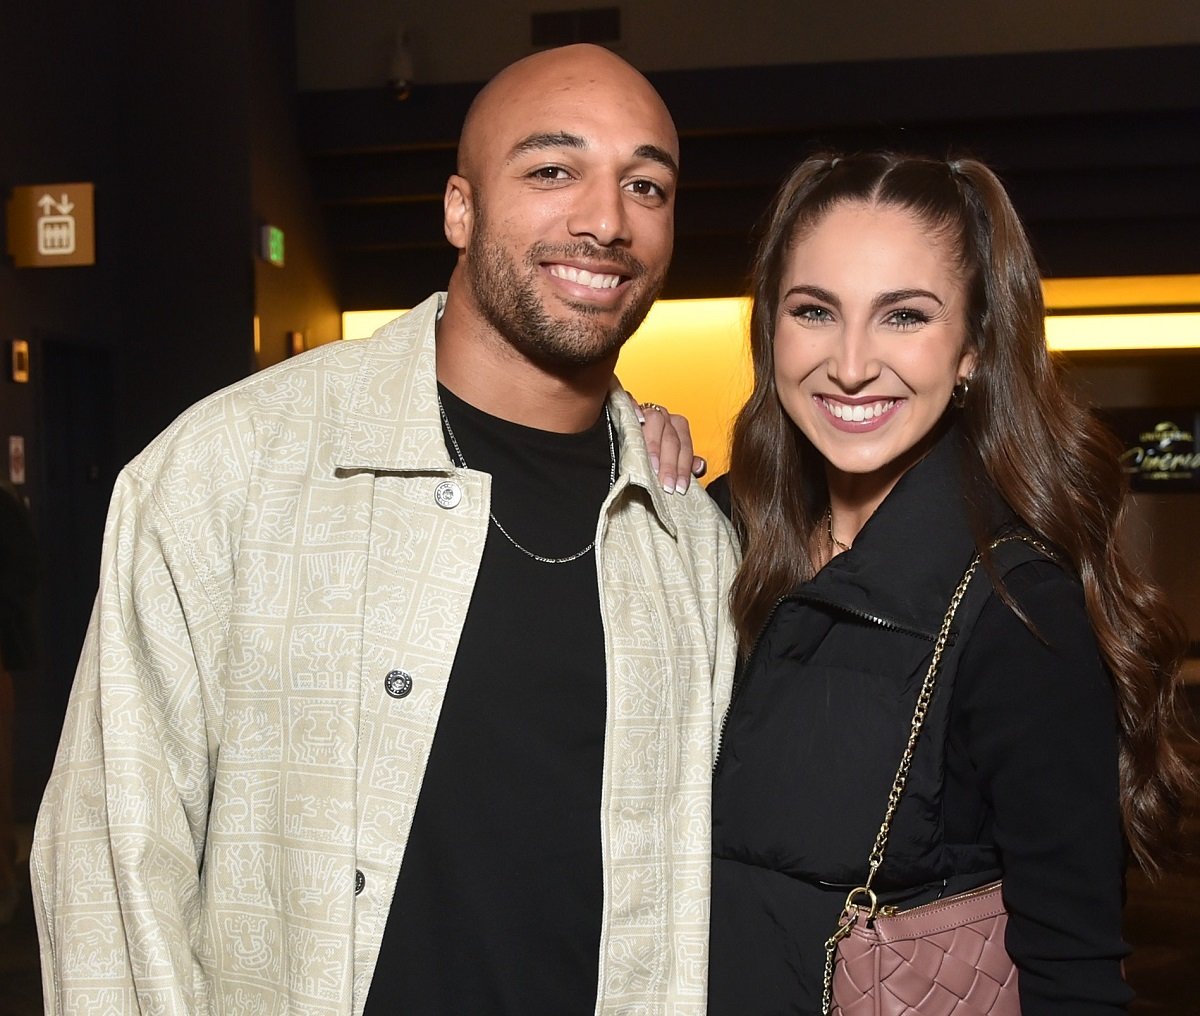 Austin Ekeler and girlfriend Melanie Wilking attend Universal Pictures Presents a special screening of M3GAN